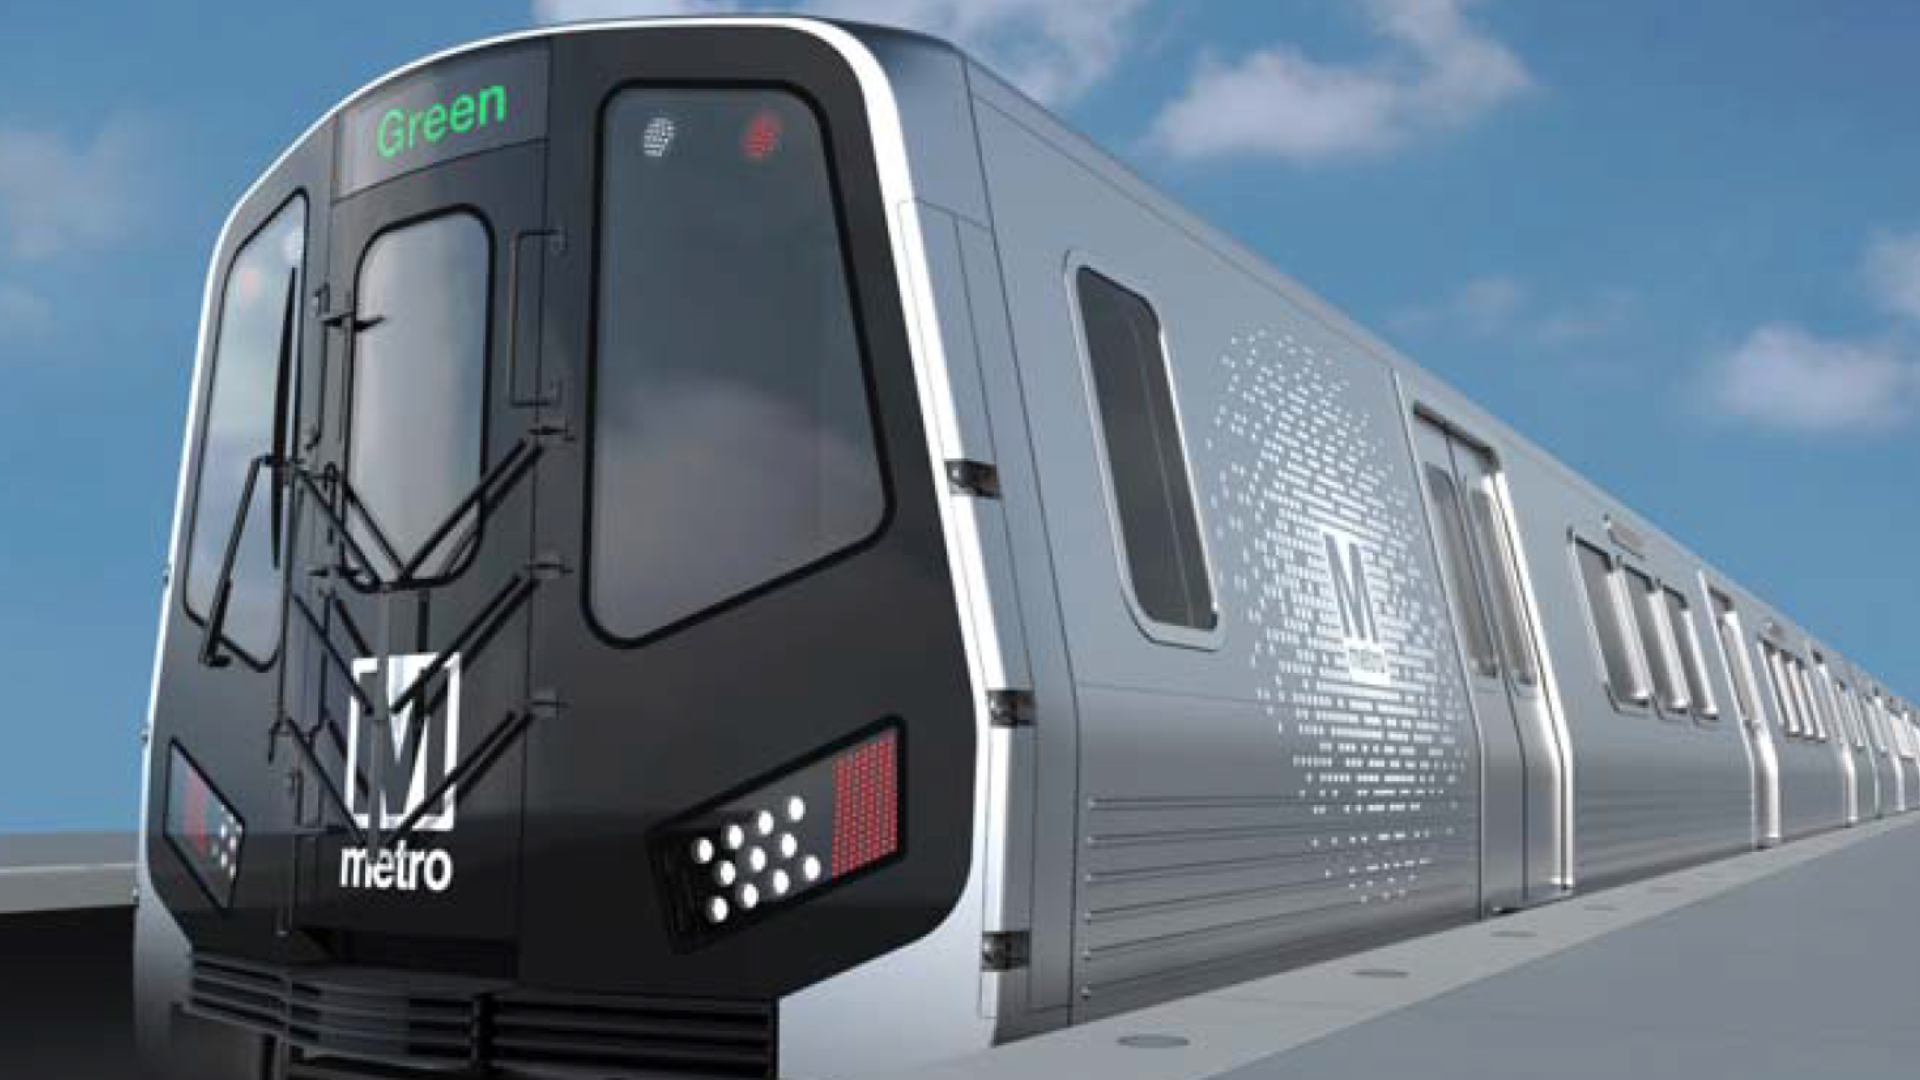 Cybersecurity experts say a Chinese-government-run company could railroad the competition to build Metro's new rail car, then steal riders' private data.